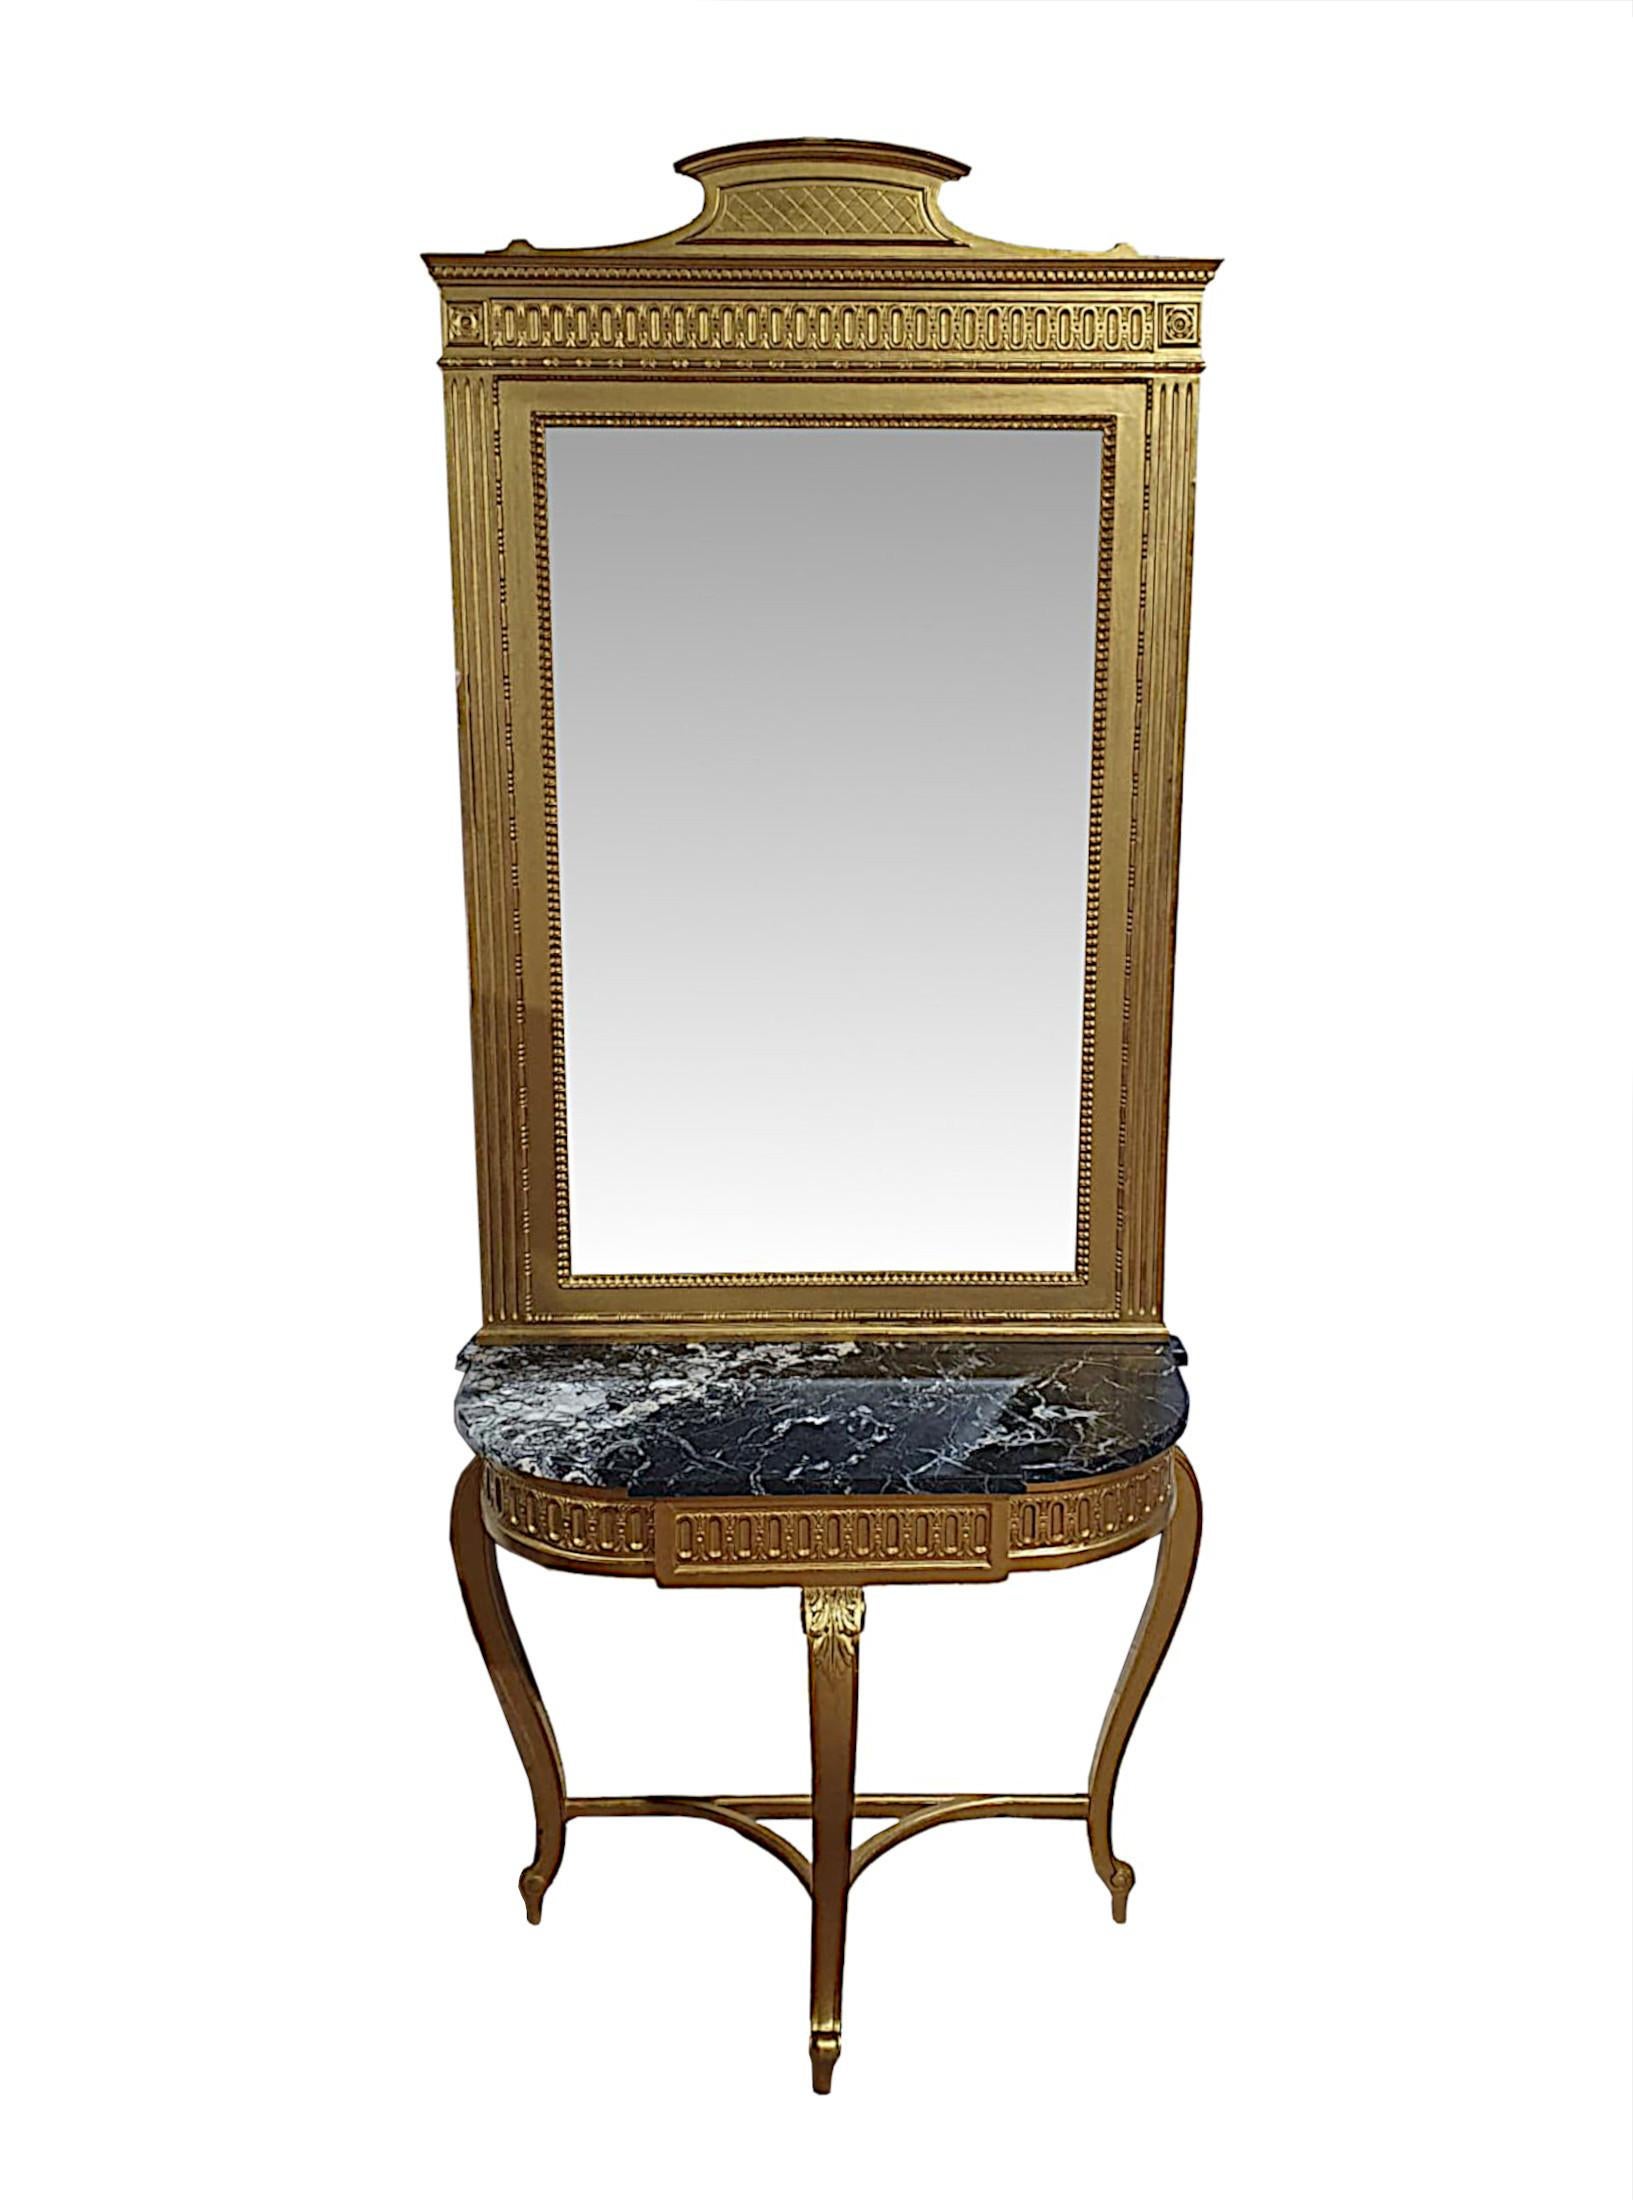 A very fine late 19th century marble top giltwood console table and matching giltwood mirror. The original bevelled mirror glass plate of rectangular form is set within a fabulously hand carved, moulded and fluted giltwood frame with beautiful